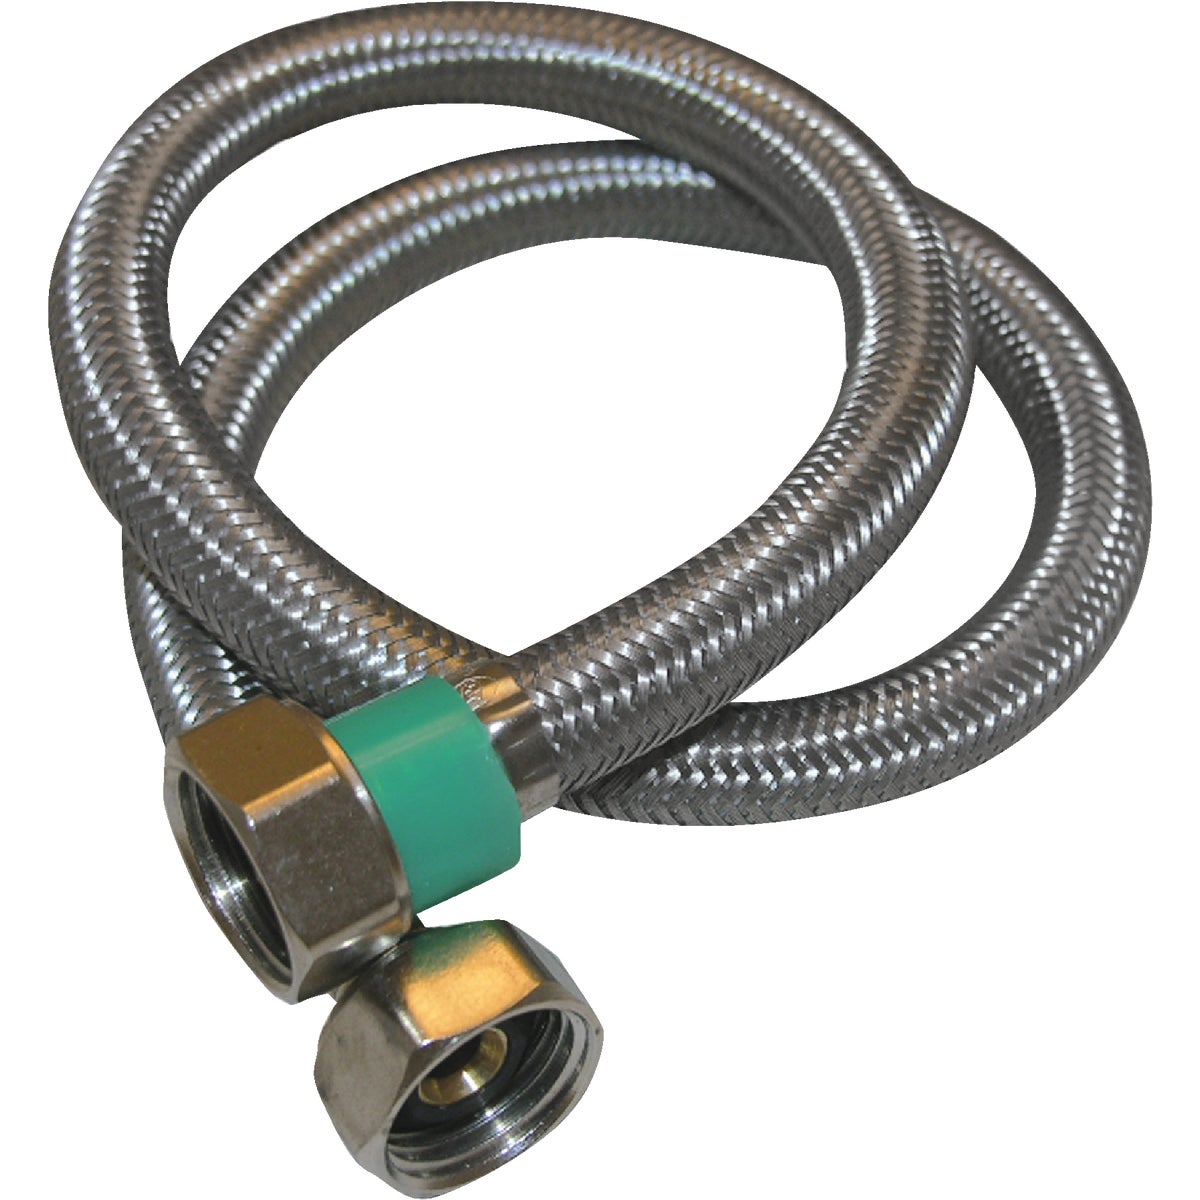 Lasco 1/2 In. IPS x 1/2 In. IPS x 30 In. L Braided Stainless Steel Flex Line Faucet Connector